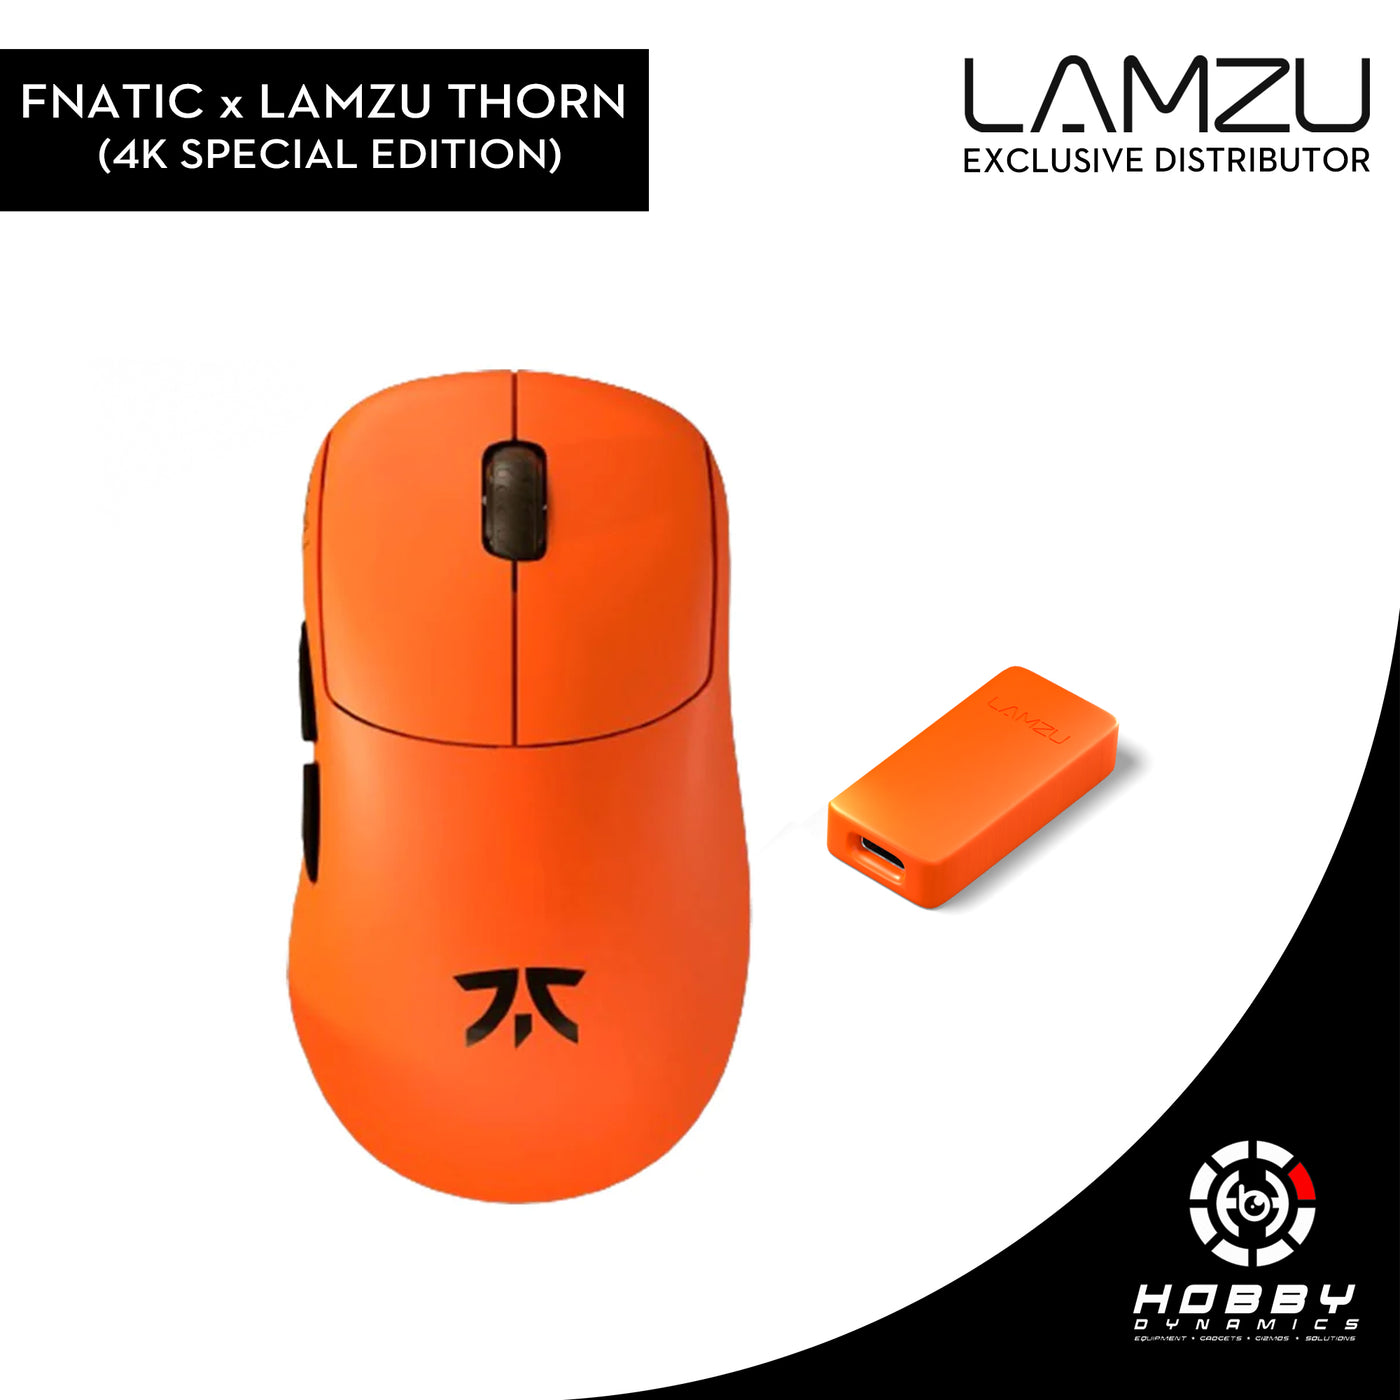 FNATIC X LAMZU THORN Gaming Mouse (4K Special Edition)